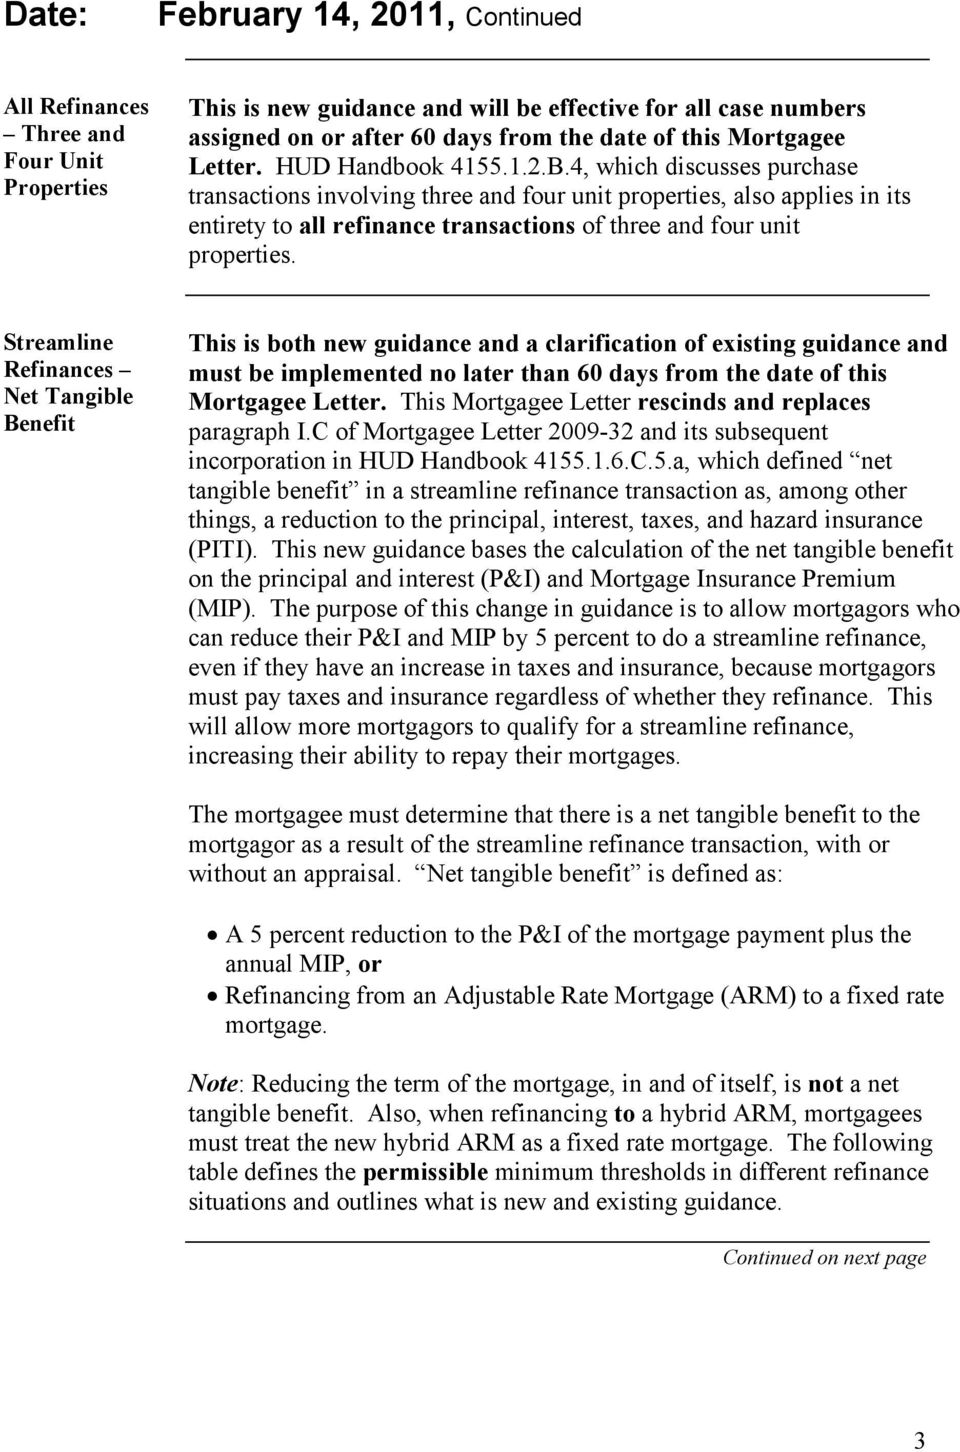 Net Tangible Benefit This is both new guidance and a clarification of existing guidance and must be implemented no later than 60 days from the date of this Mortgagee Letter.